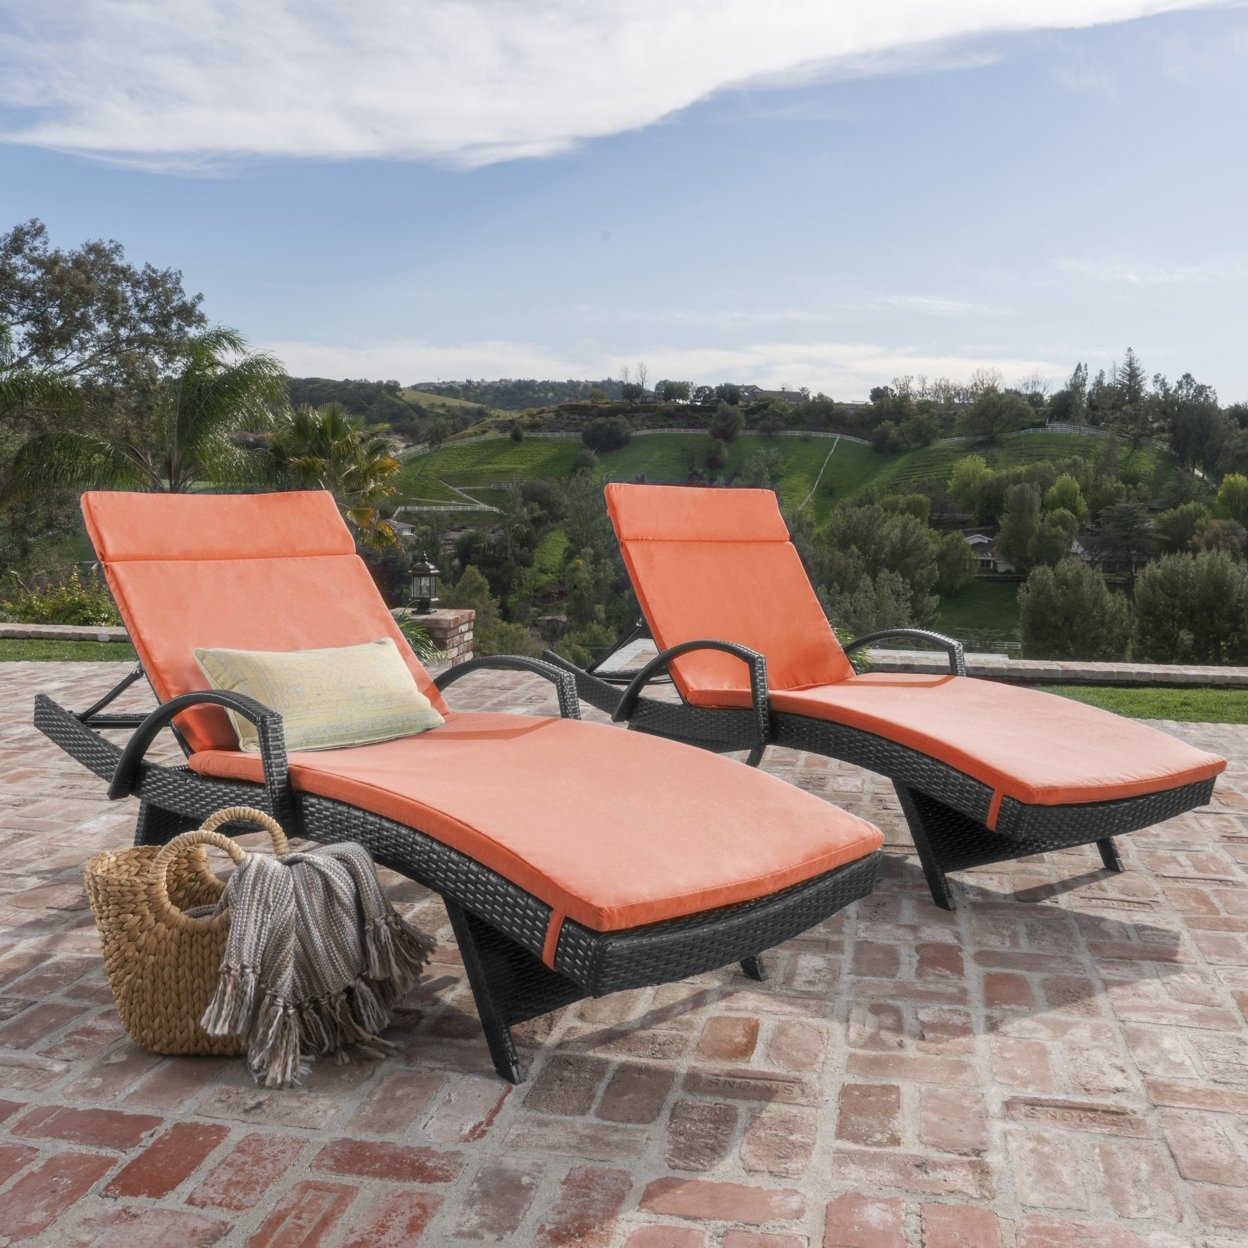 Soleil Outdoor Wicker Chaise Lounges With Water Resistant Cushions (Set Of 2) - Charcoal